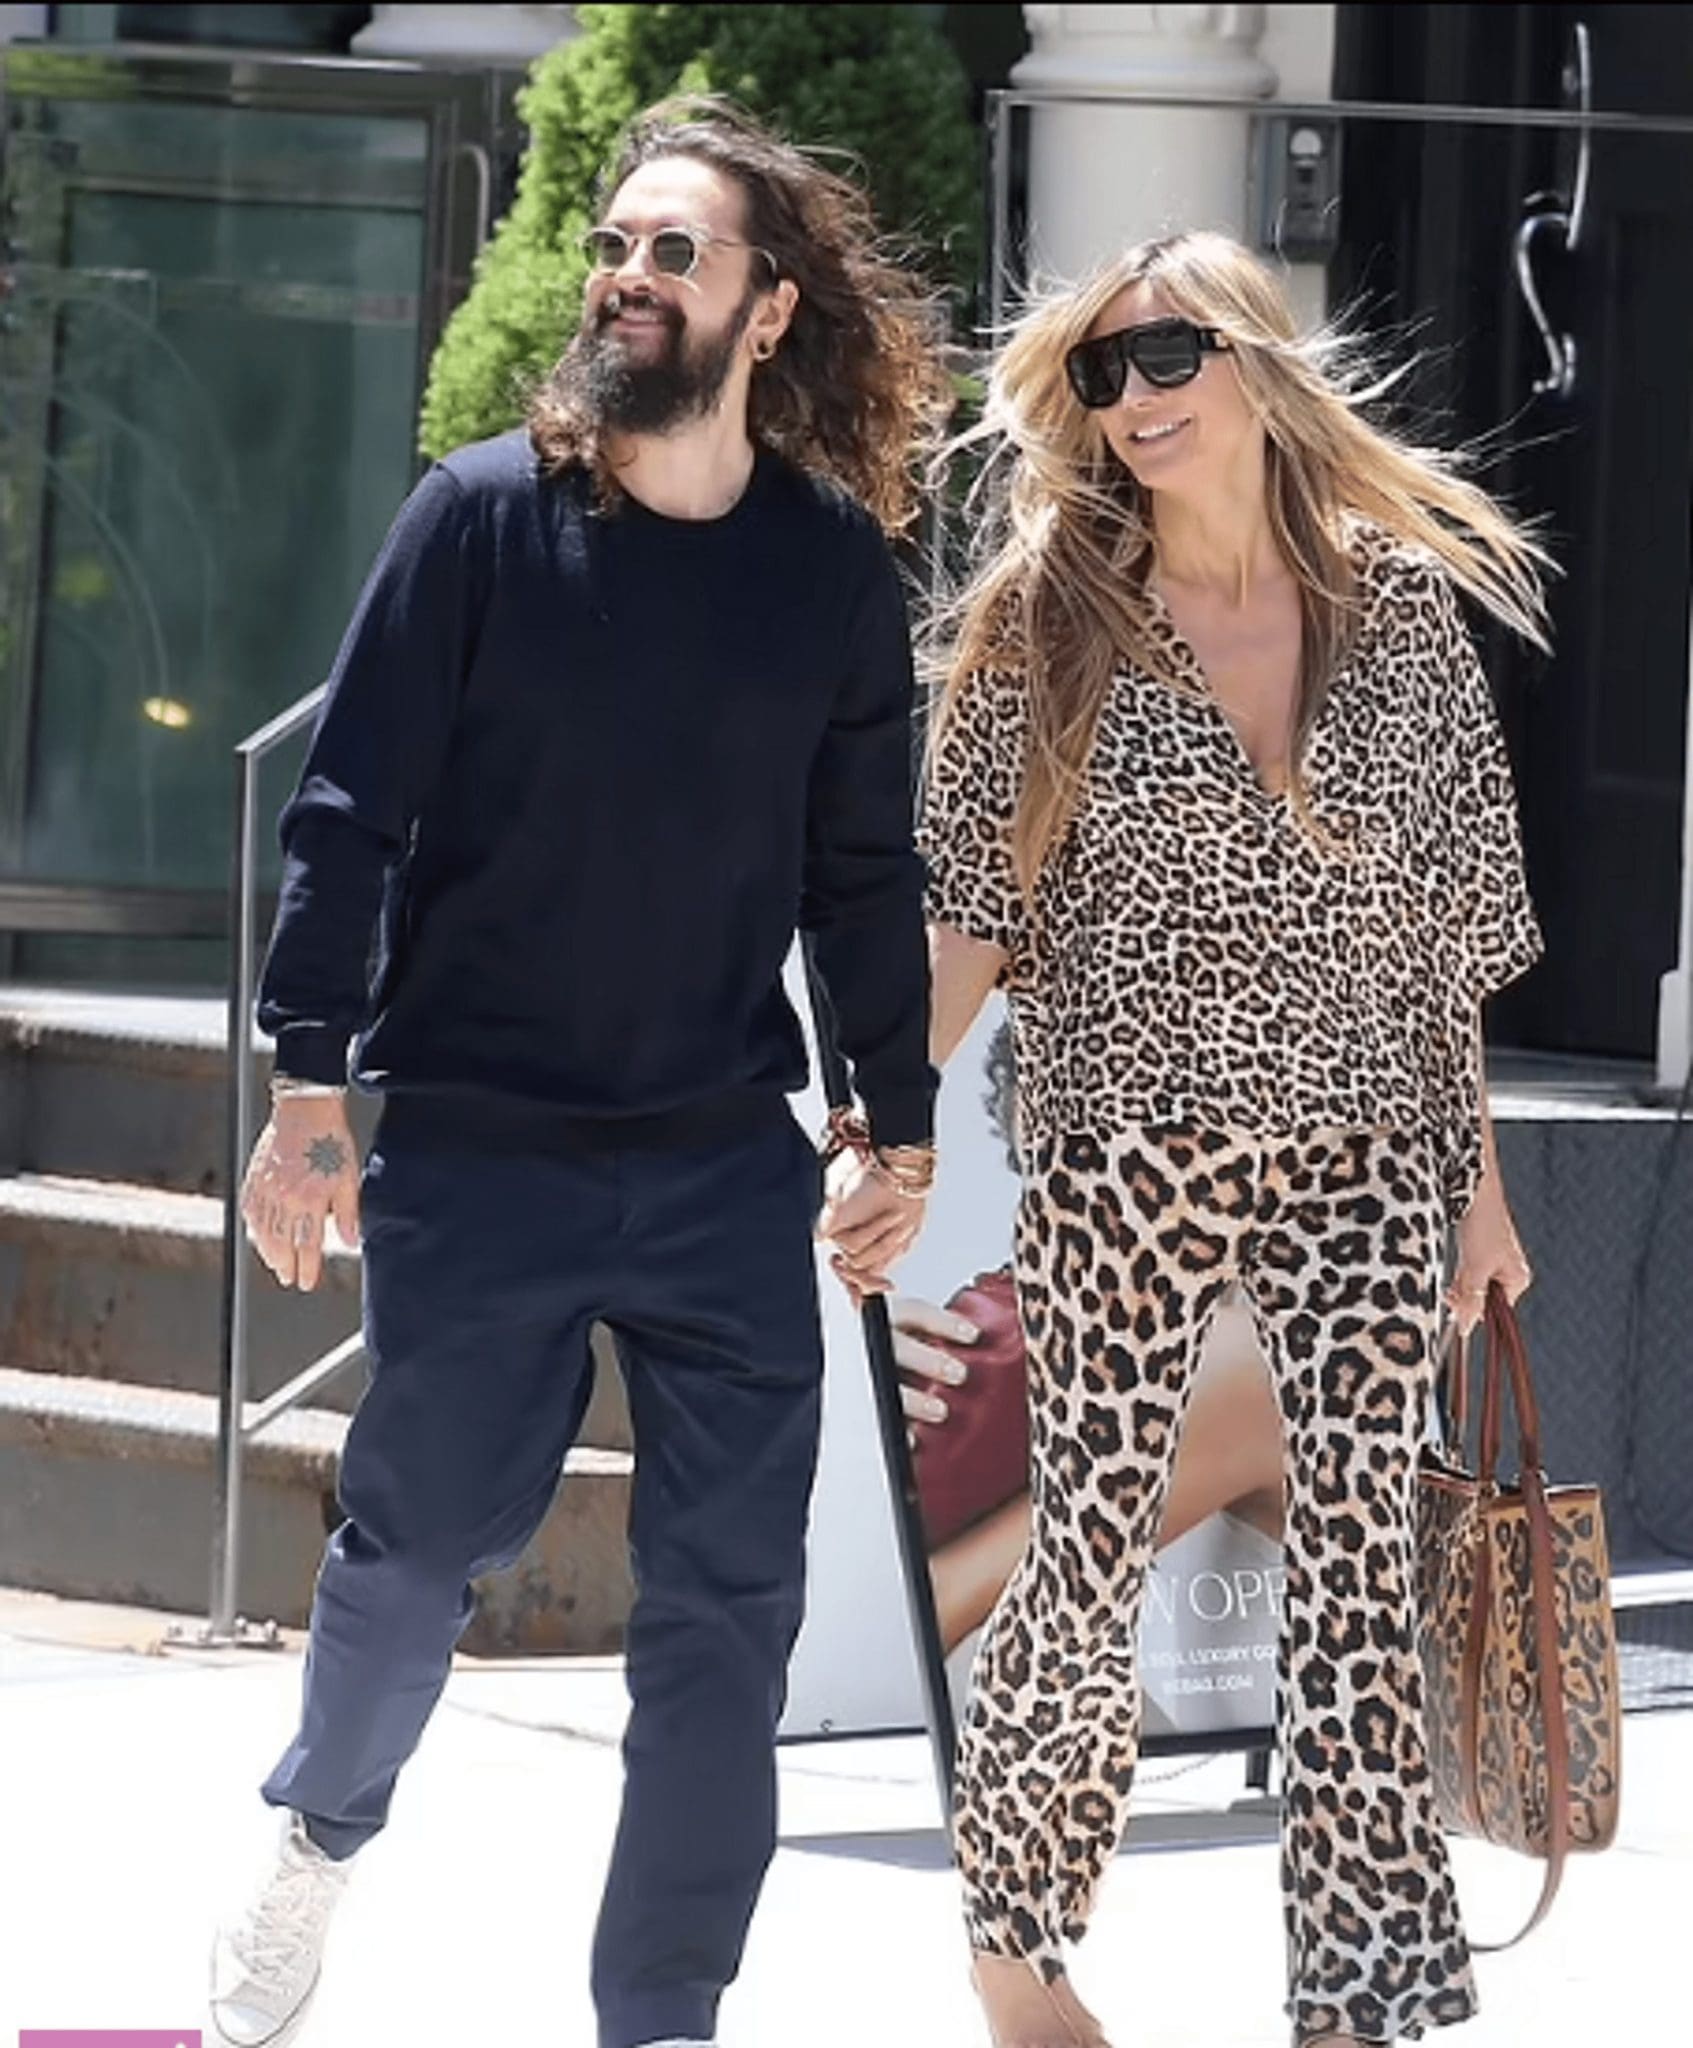 Supermodel Heidi Klum in a 'predatory' total bow, walked with her husband in New York